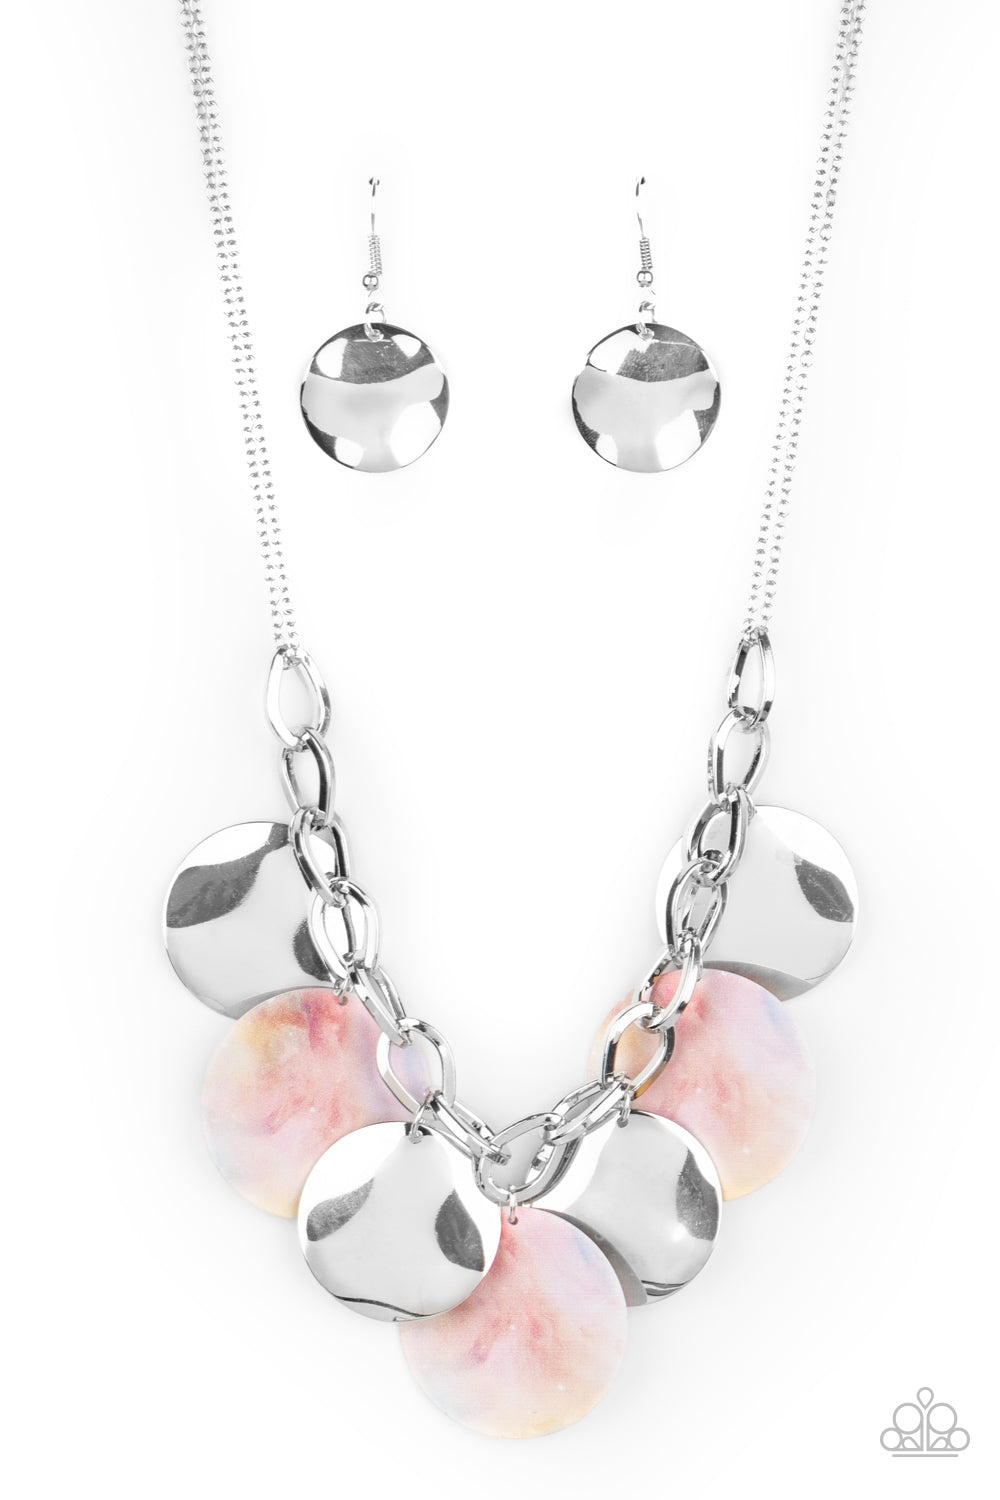 Tie Dye Drama Multi Necklace - Paparazzi Accessories. Featuring a galactic tie dye print, flat colorful discs swirled in tones of pink and yellow combine with curved silver discs, swinging from the bottom of a bulky silver chain for a trendy throwback look. Features an adjustable clasp closure.  All Paparazzi Accessories are lead free and nickel free!  Sold as one individual necklace. Includes one pair of matching earrings.  Get The Complete Look! Bracelet: "Teasingly Tie Die - Multi" (Sold Separately)